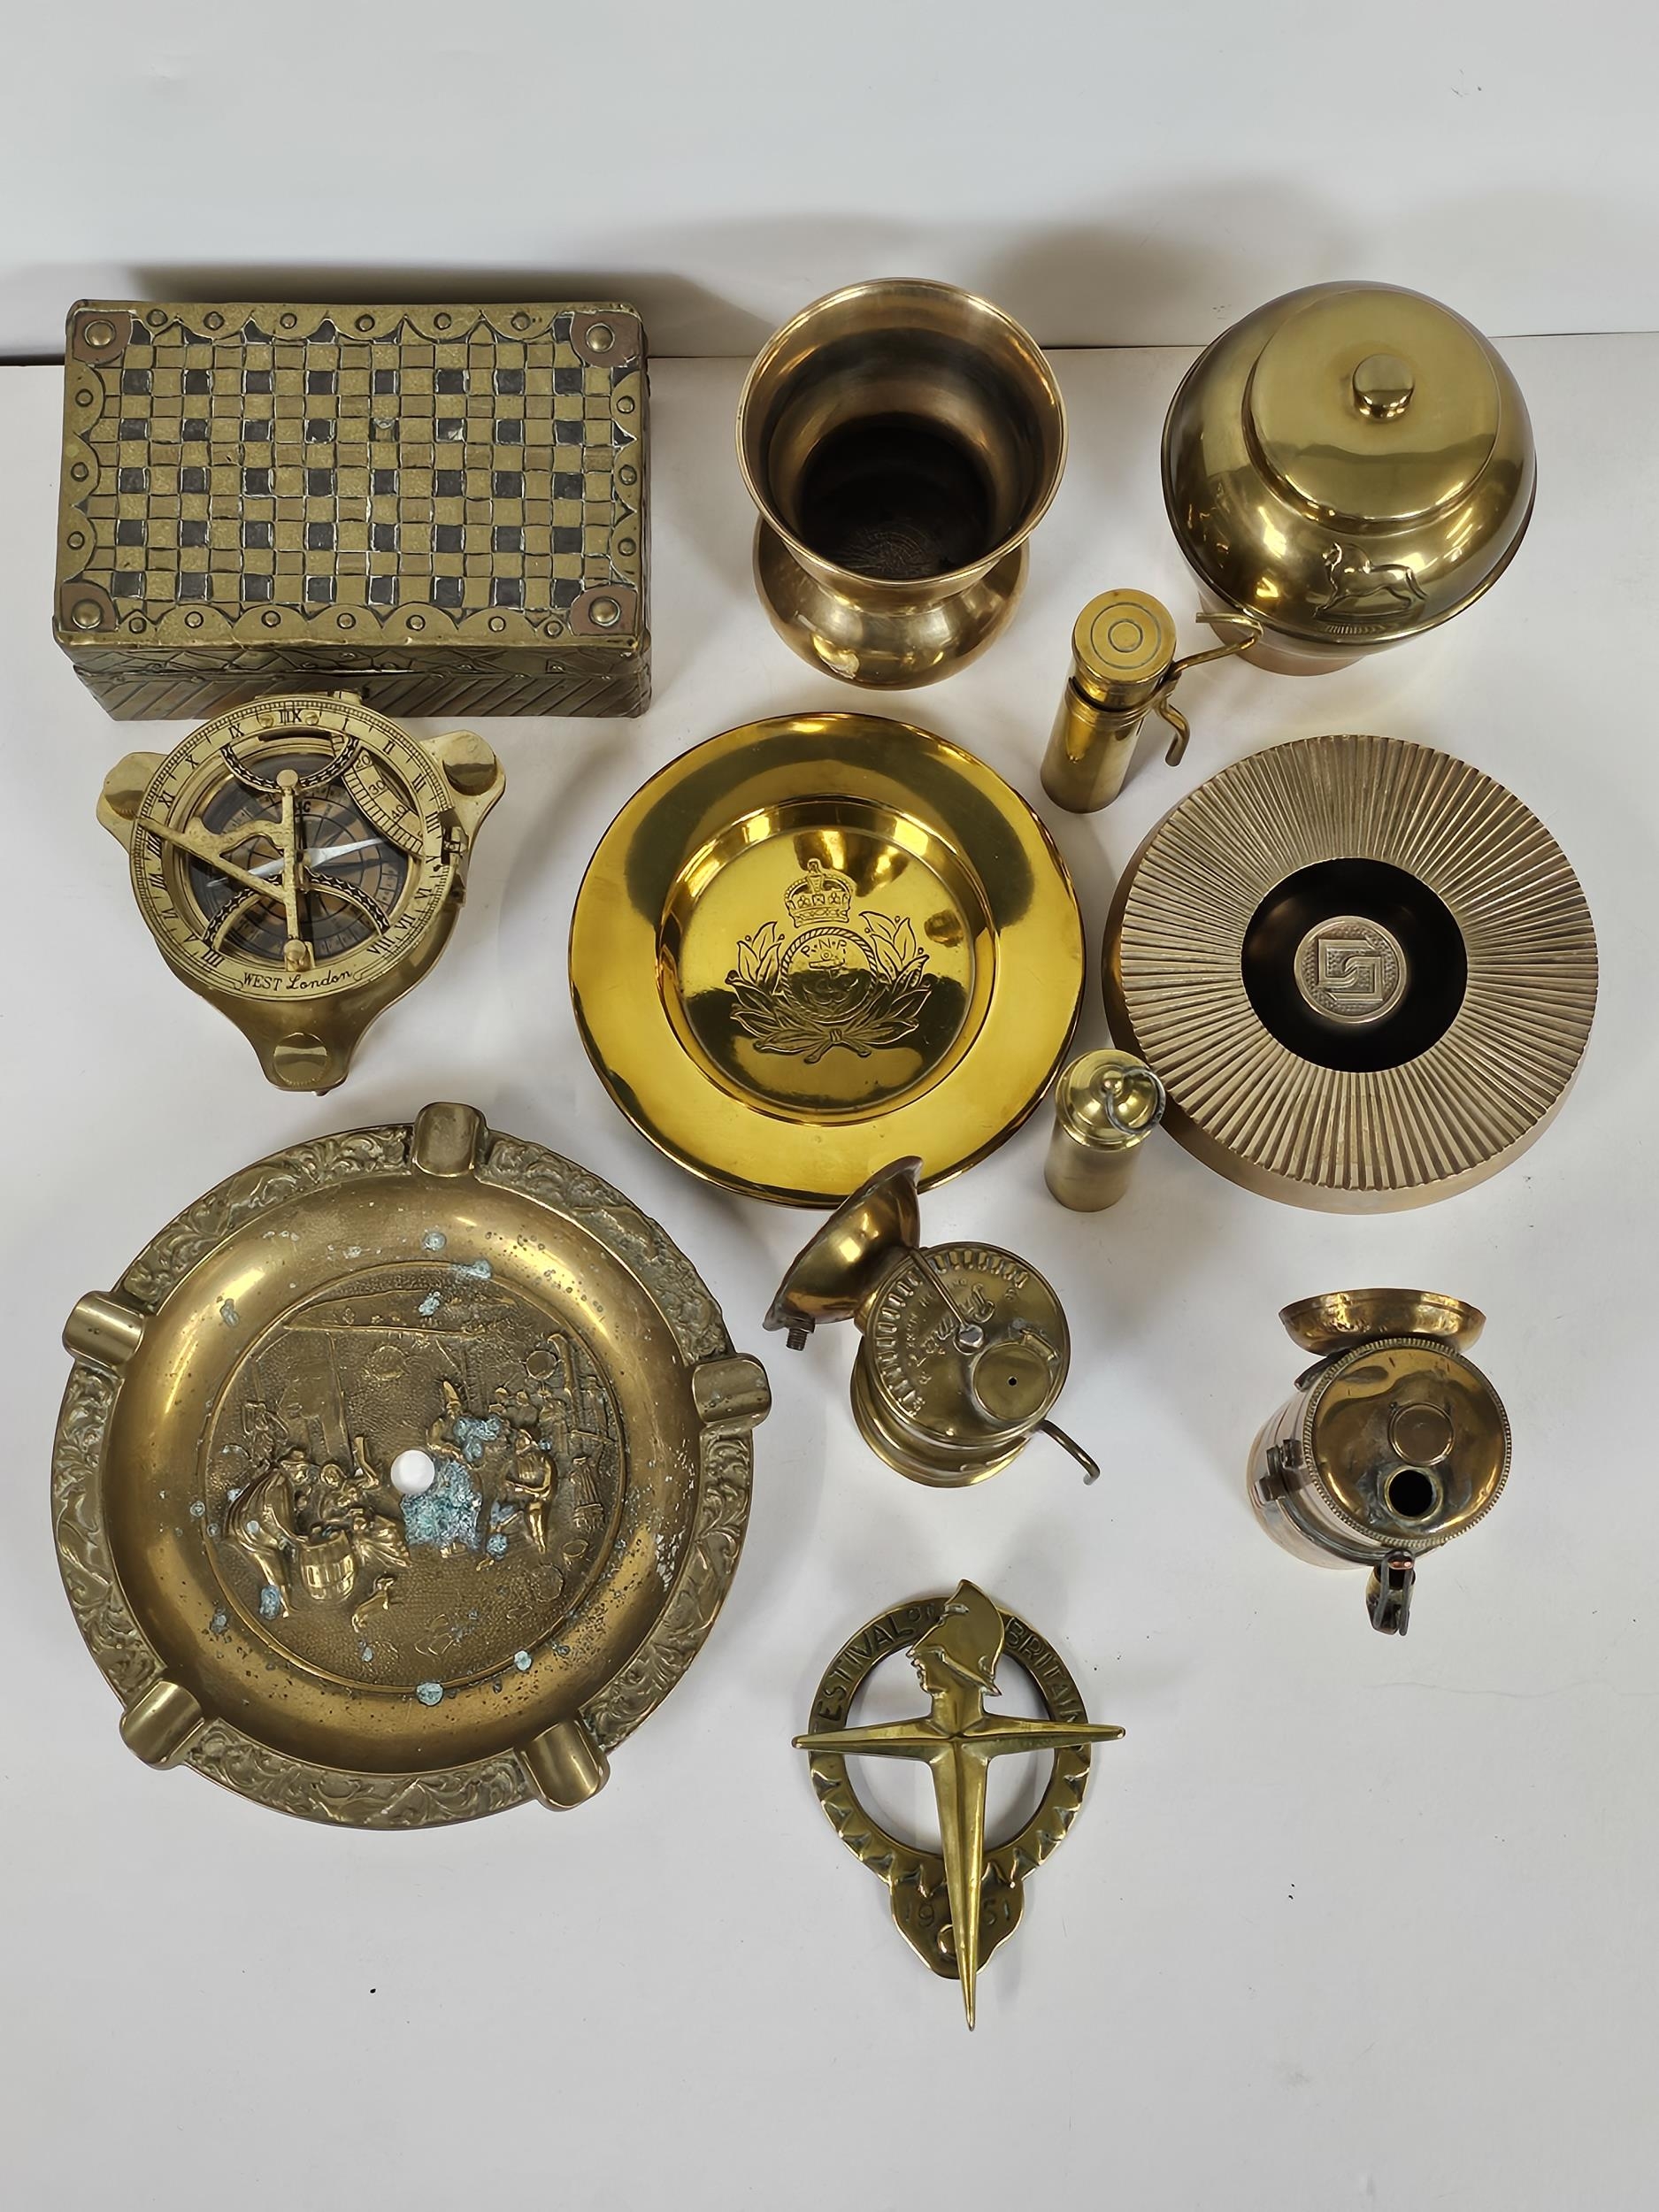 Large quantity of brass items including a Lipton British Empire Exhibition tea caddy and a desk